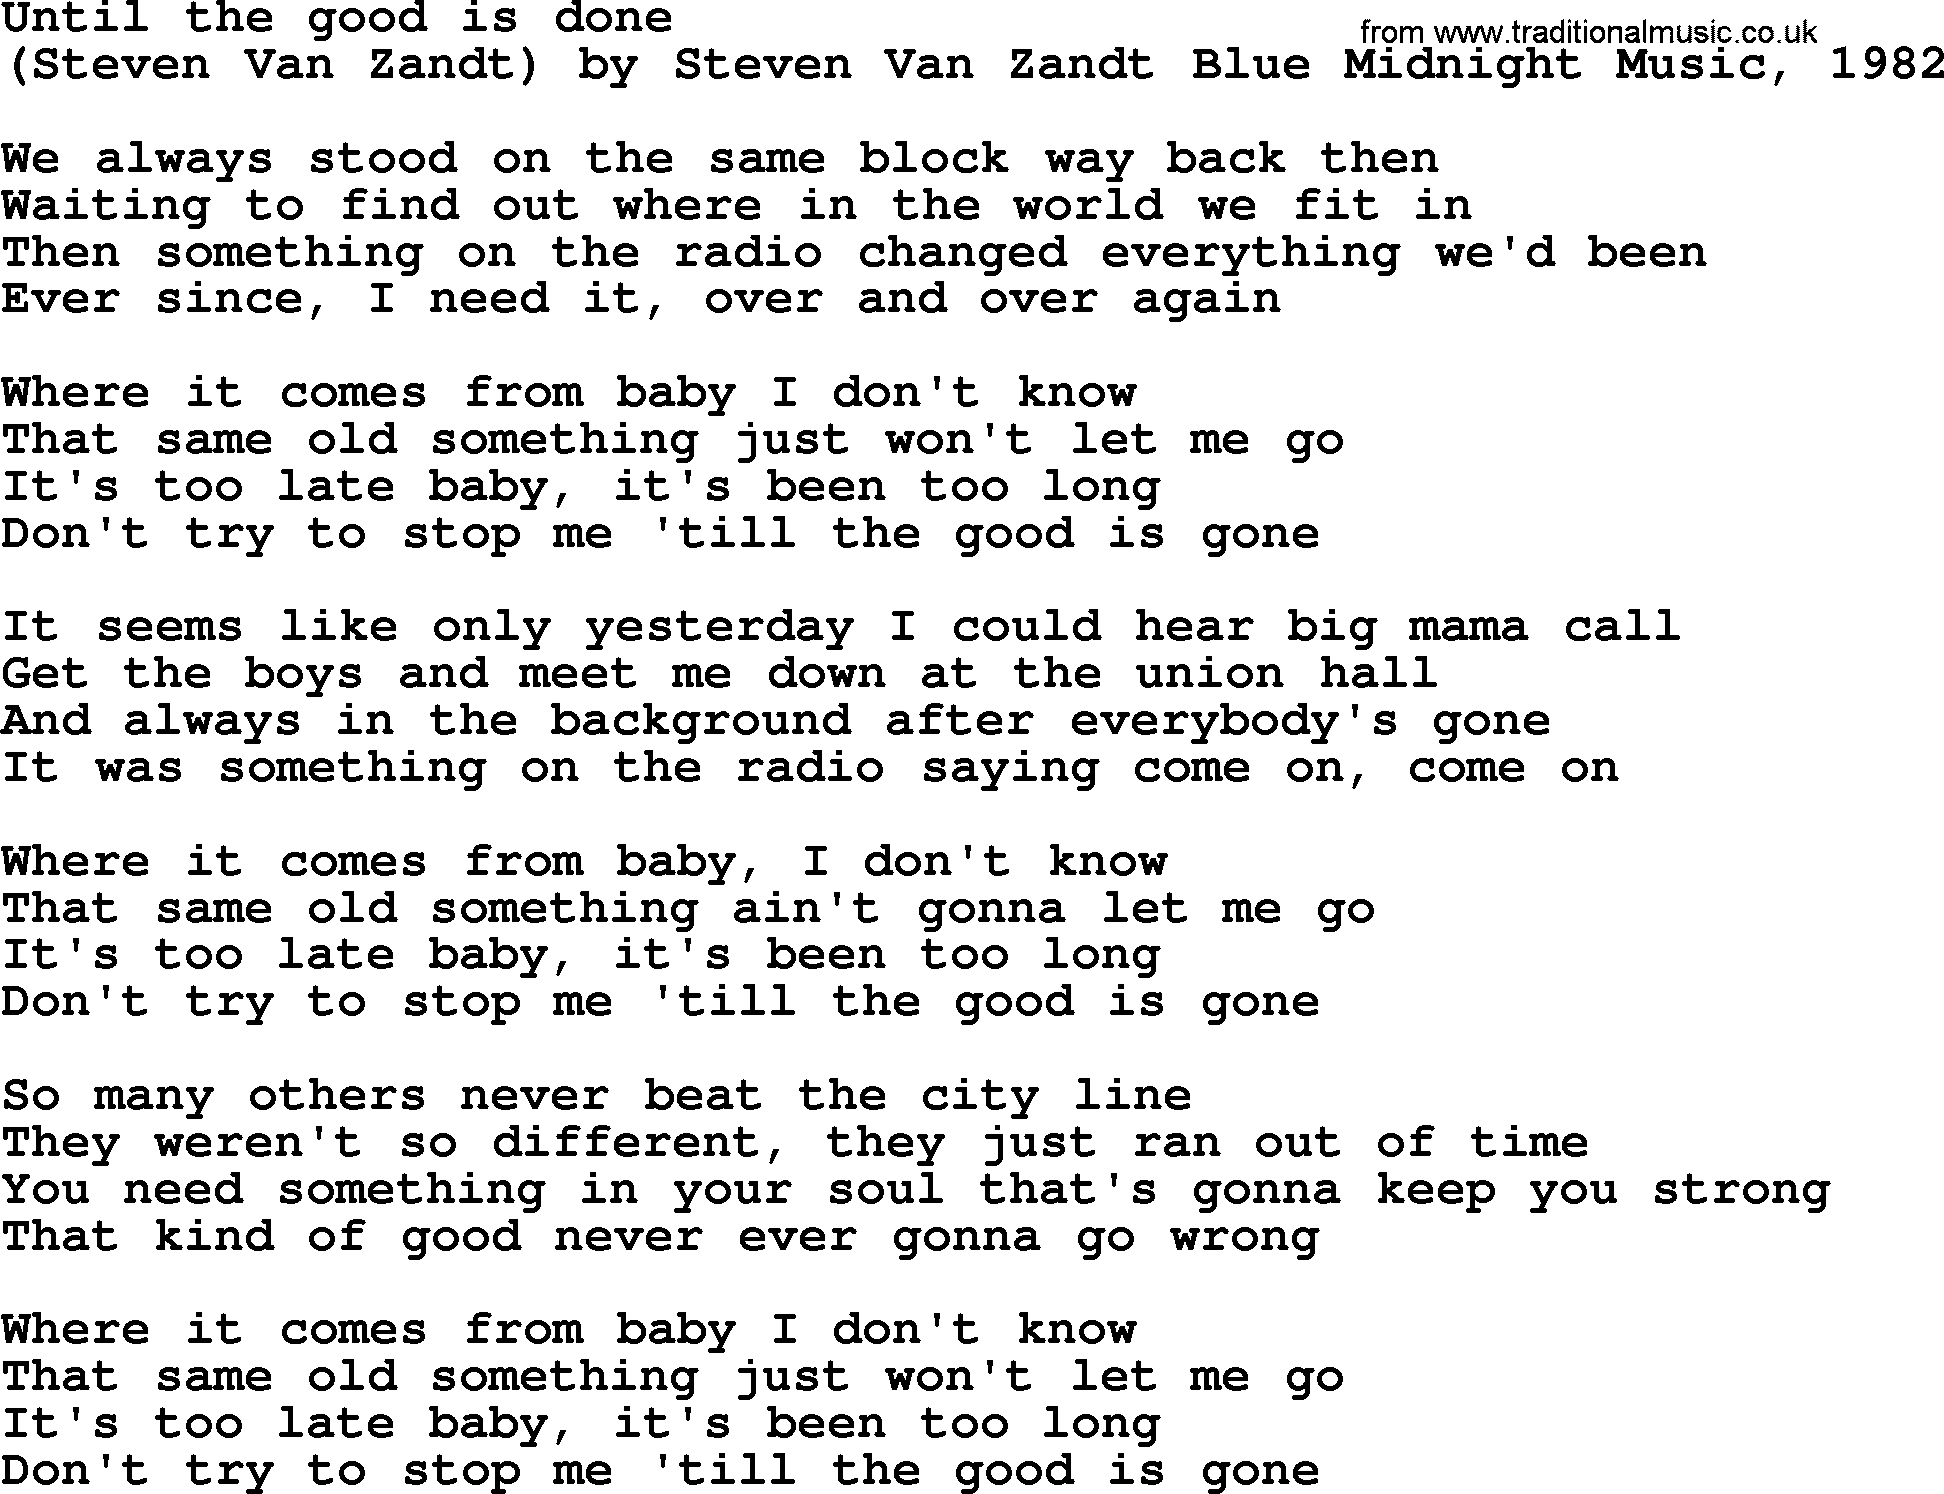 Bruce Springsteen song: Until The Good Is Done lyrics